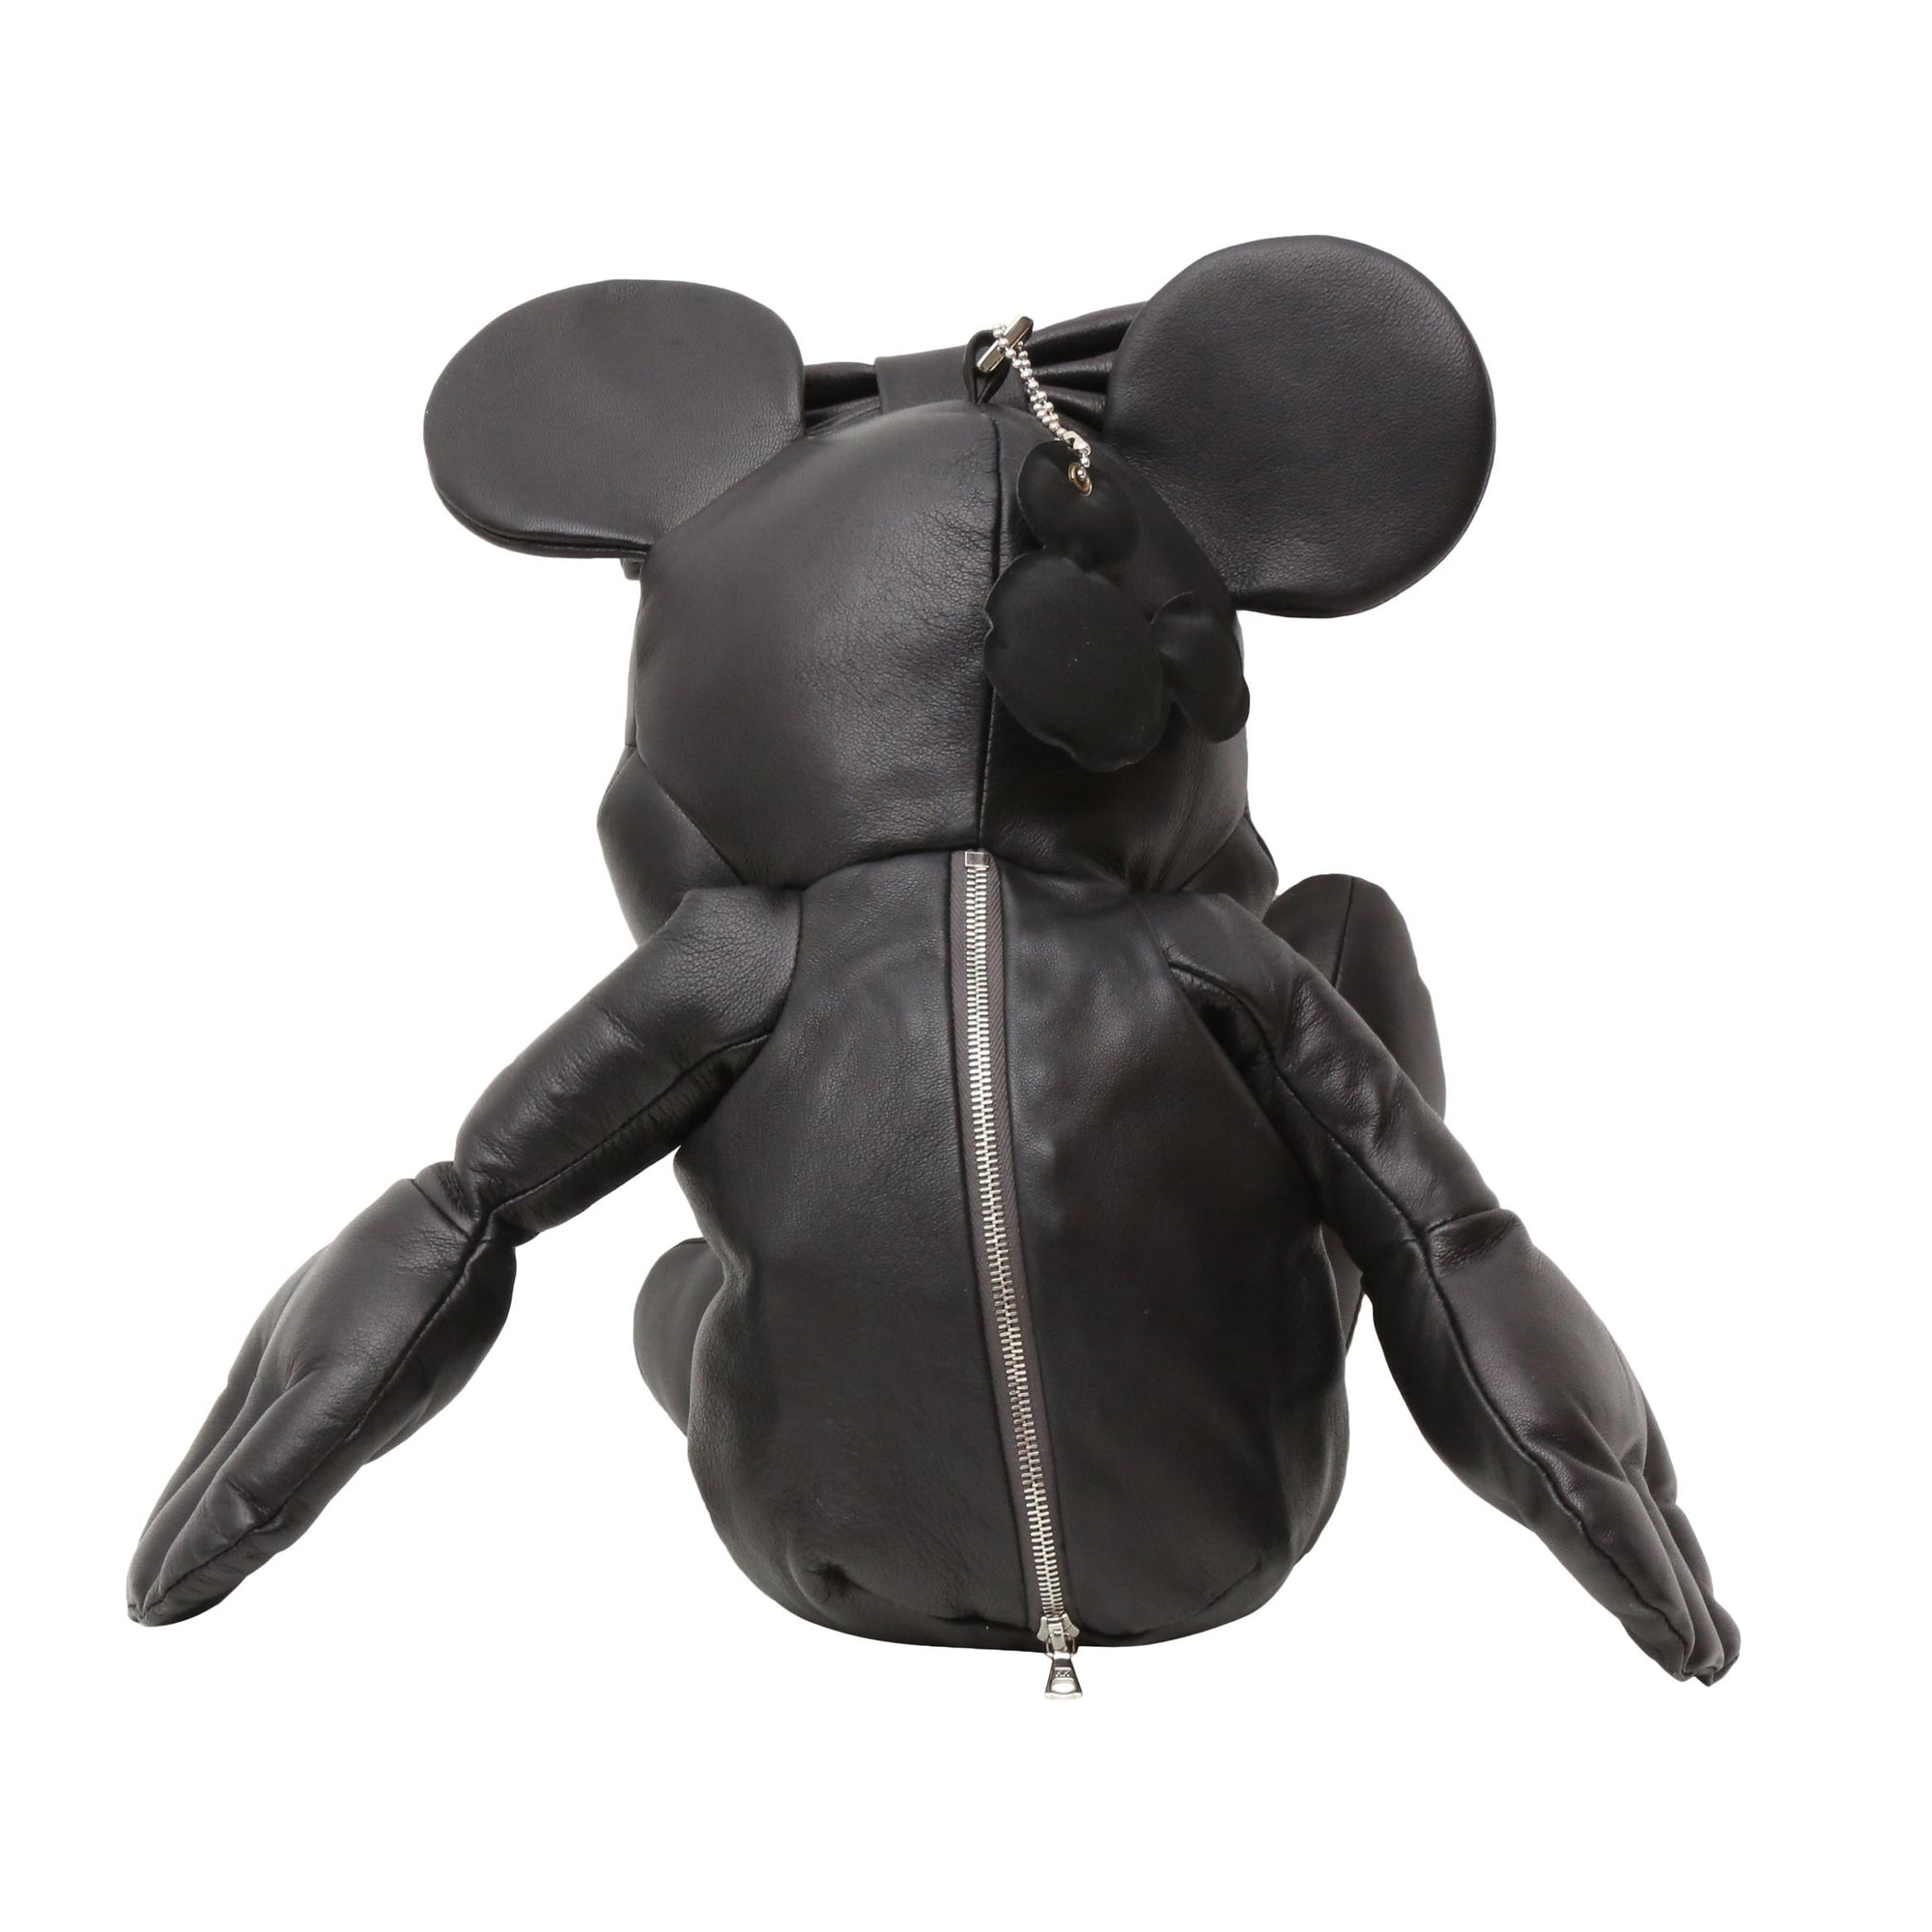 Christopher Raeburn x Disney Mickey and Minnie Mouse Bags